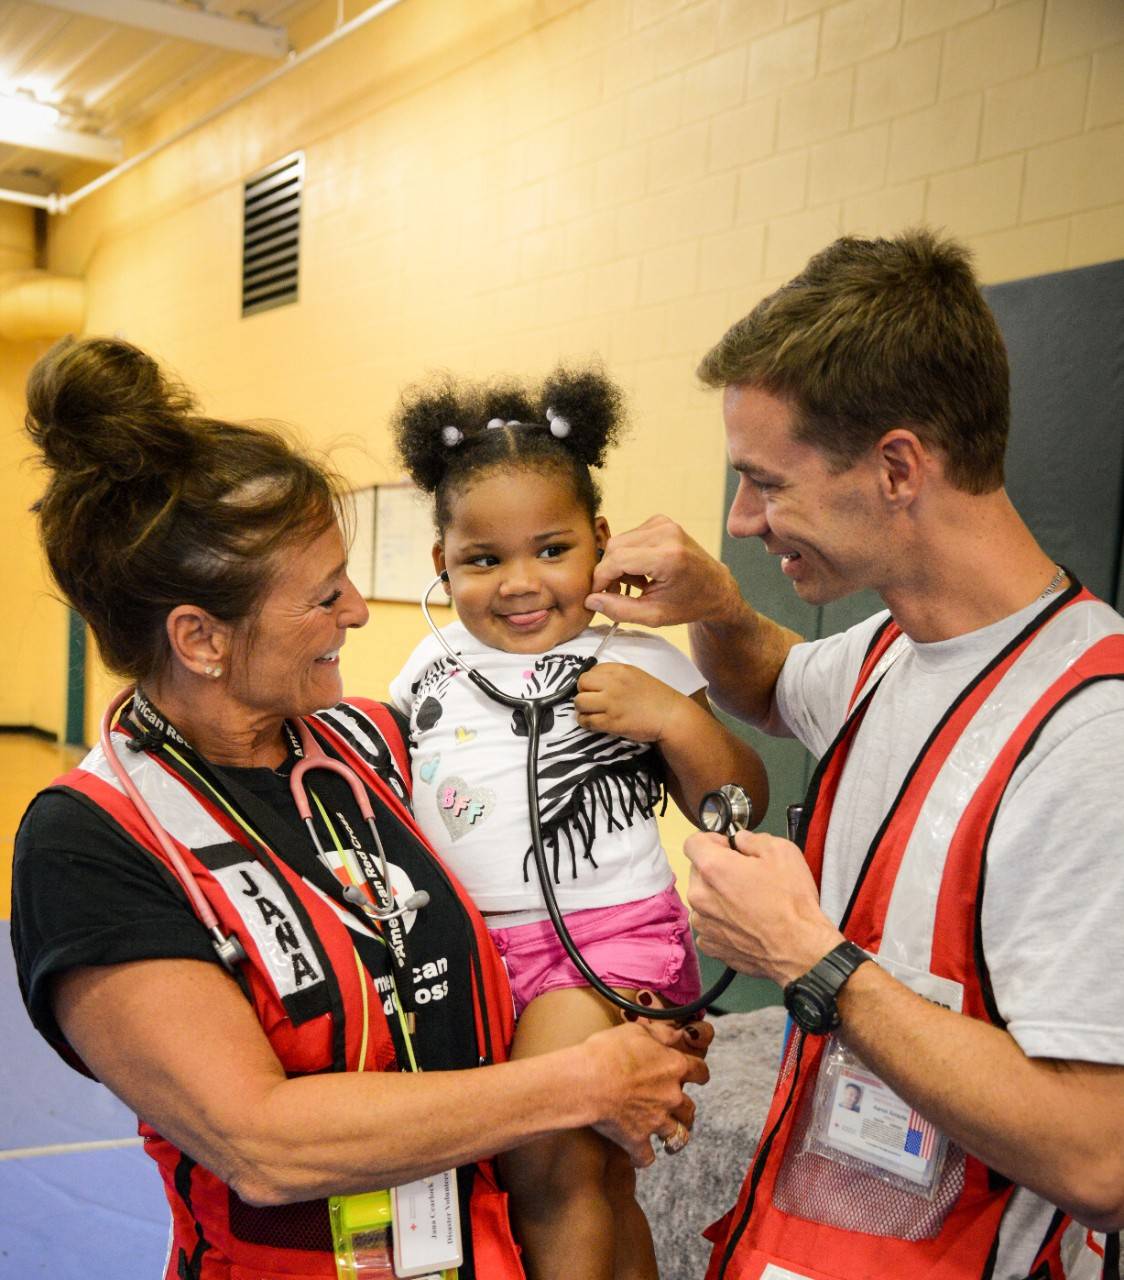 September 5, 2019. Jacksonville, Florida.
American Red Cross nurse Jana Cearlock and volunteer Aaron Arrants let 2-year-old Karmin Nelson listen through Nurse Jana’s stethoscope. Karmin and her great-grandmother, Minnie McDonald came to the evacuation shelter at the Legends Center to find a safe haven as Hurricane Dorian passed near the Jacksonville area.
Photo by Daniel Cima/American Red Cross